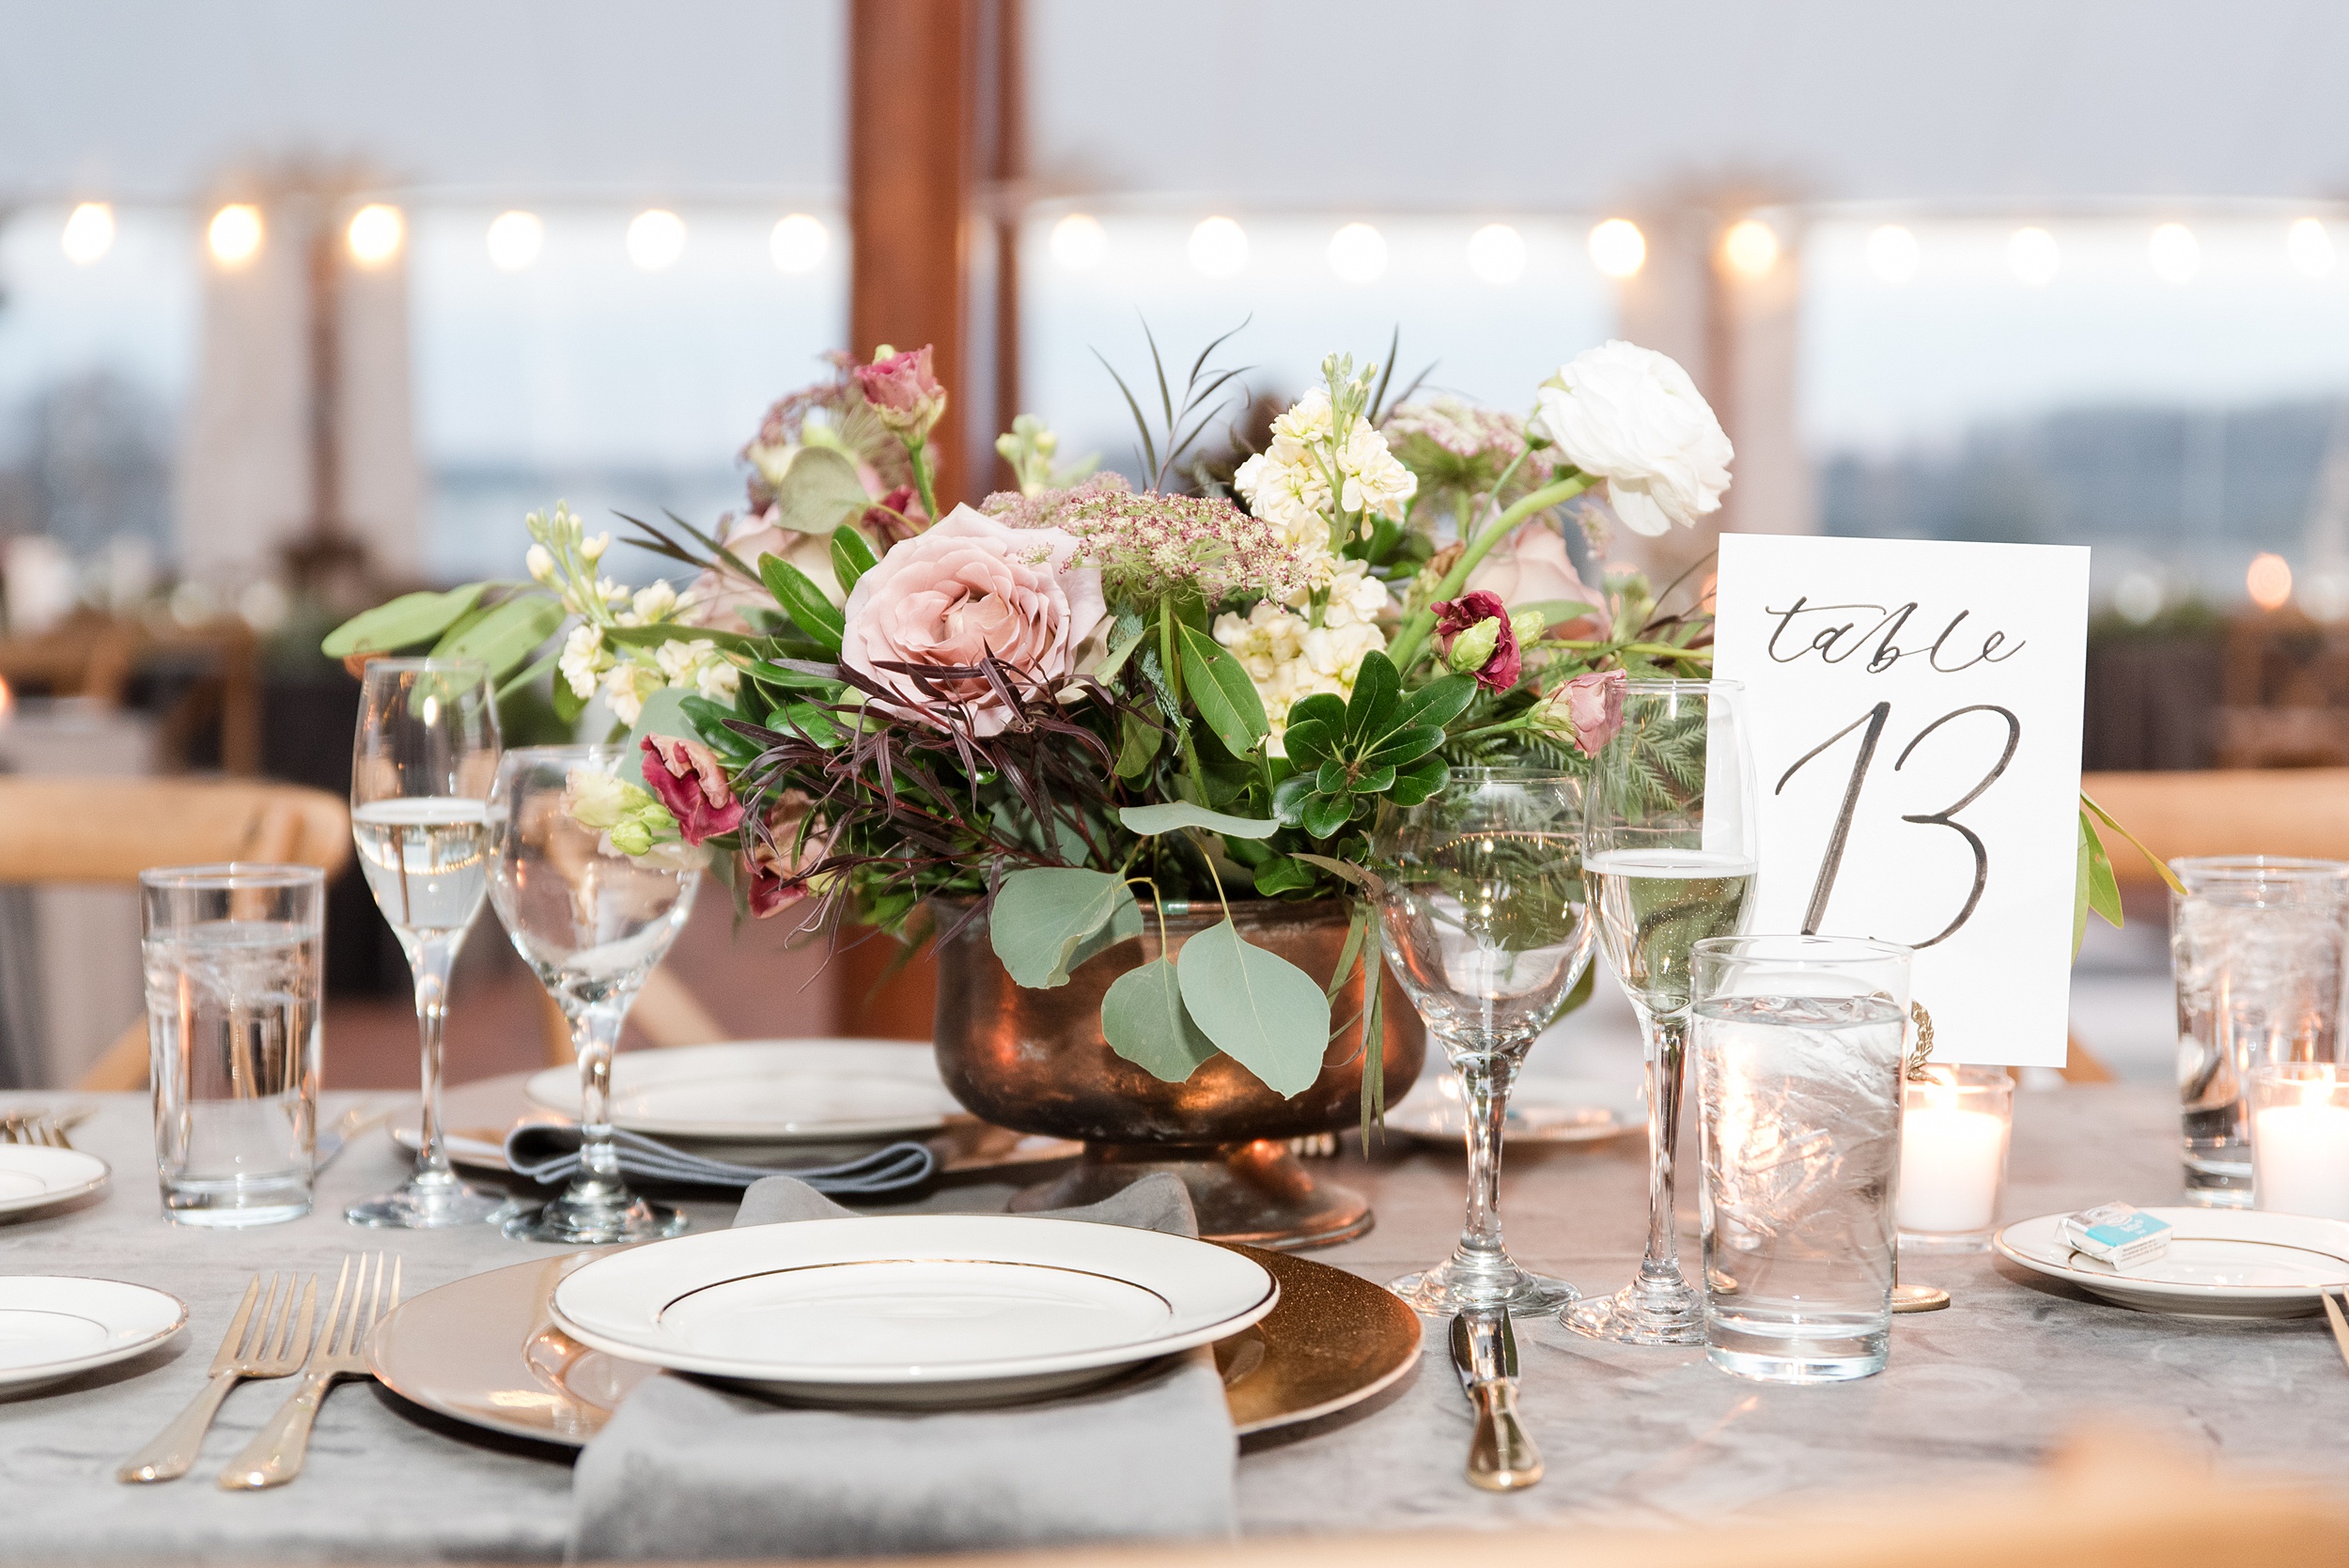 Details of a wedding reception table setting with a copper vase filled with flowers